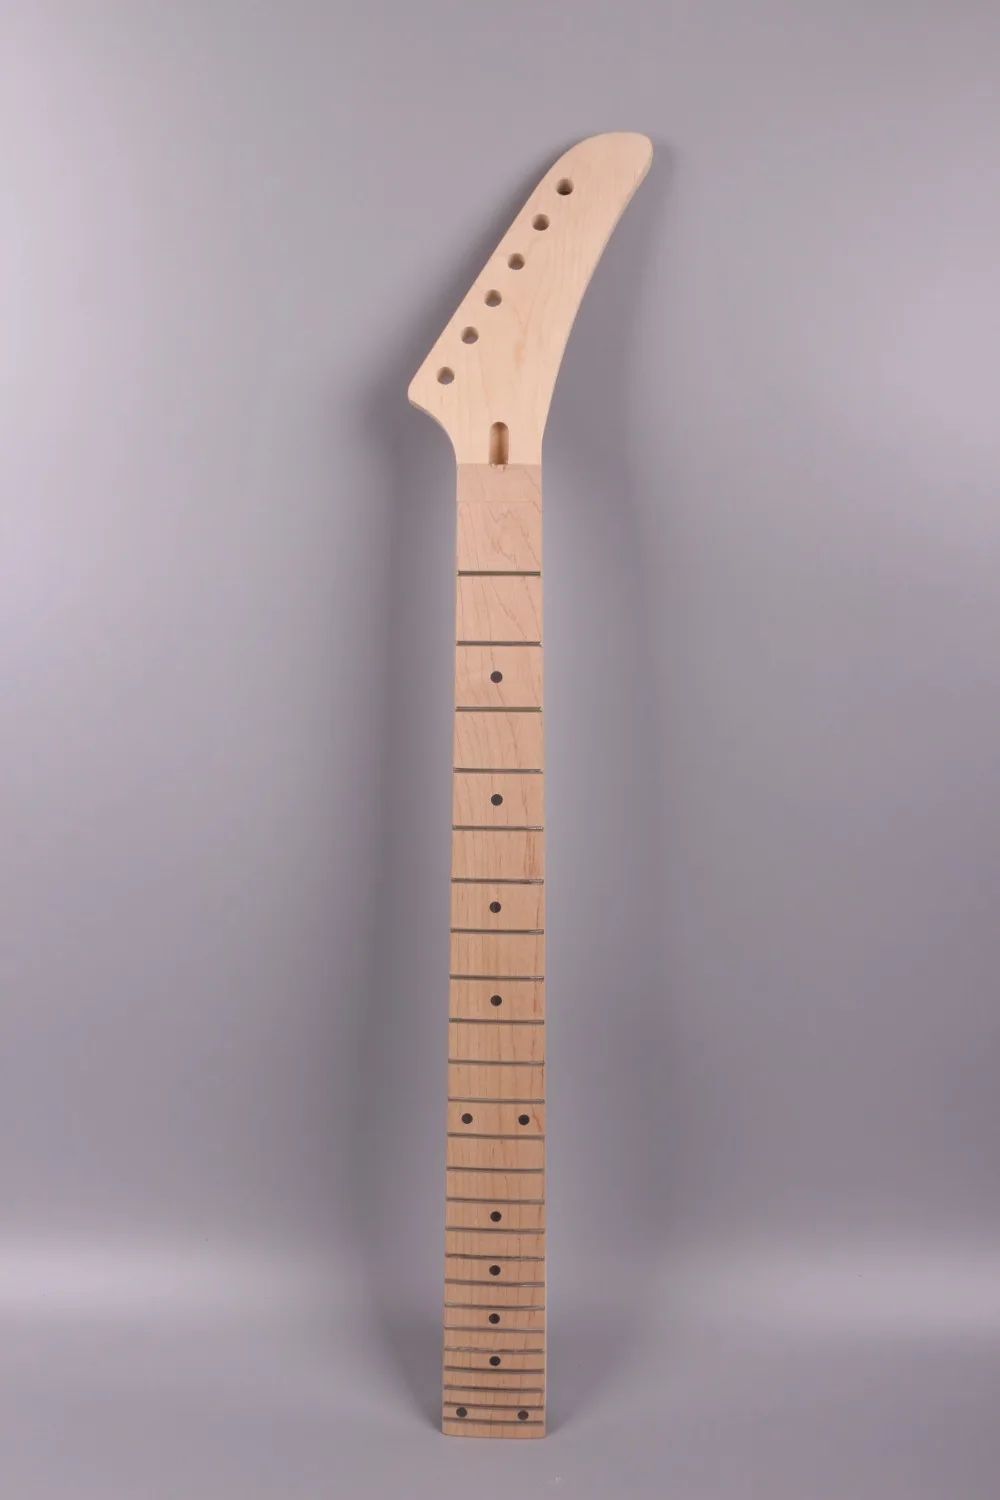 Yinfente Babana electric guitar neck replacement 24 fret Maple fretboard Dot inlay 25.5 inch Locking Nut Maple Neck ST Strat enlarge